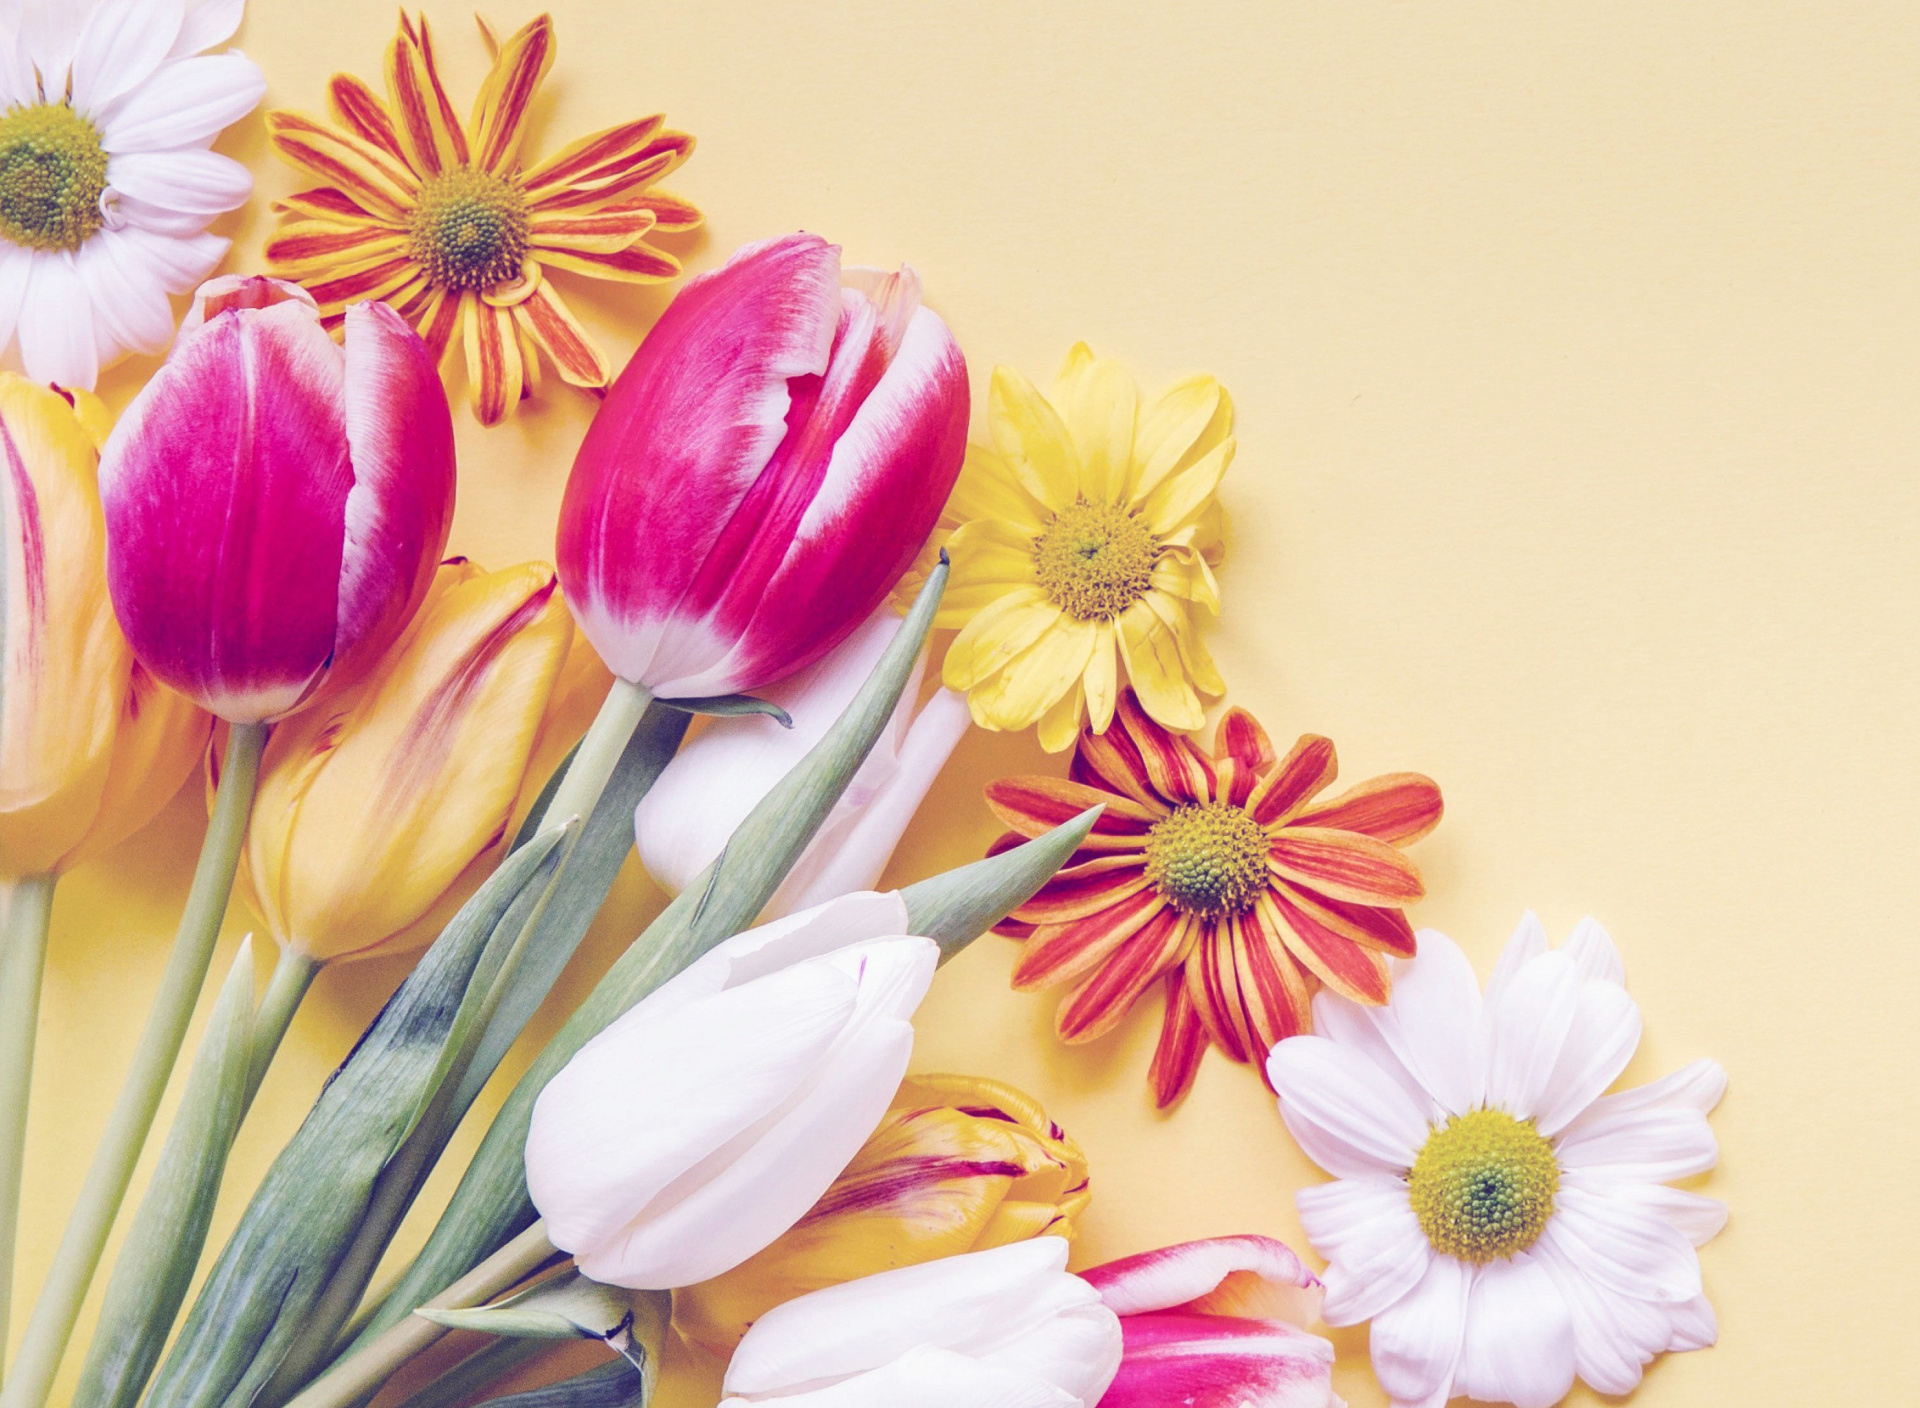 Spring tulips on yellow background wallpaper 1920x1408